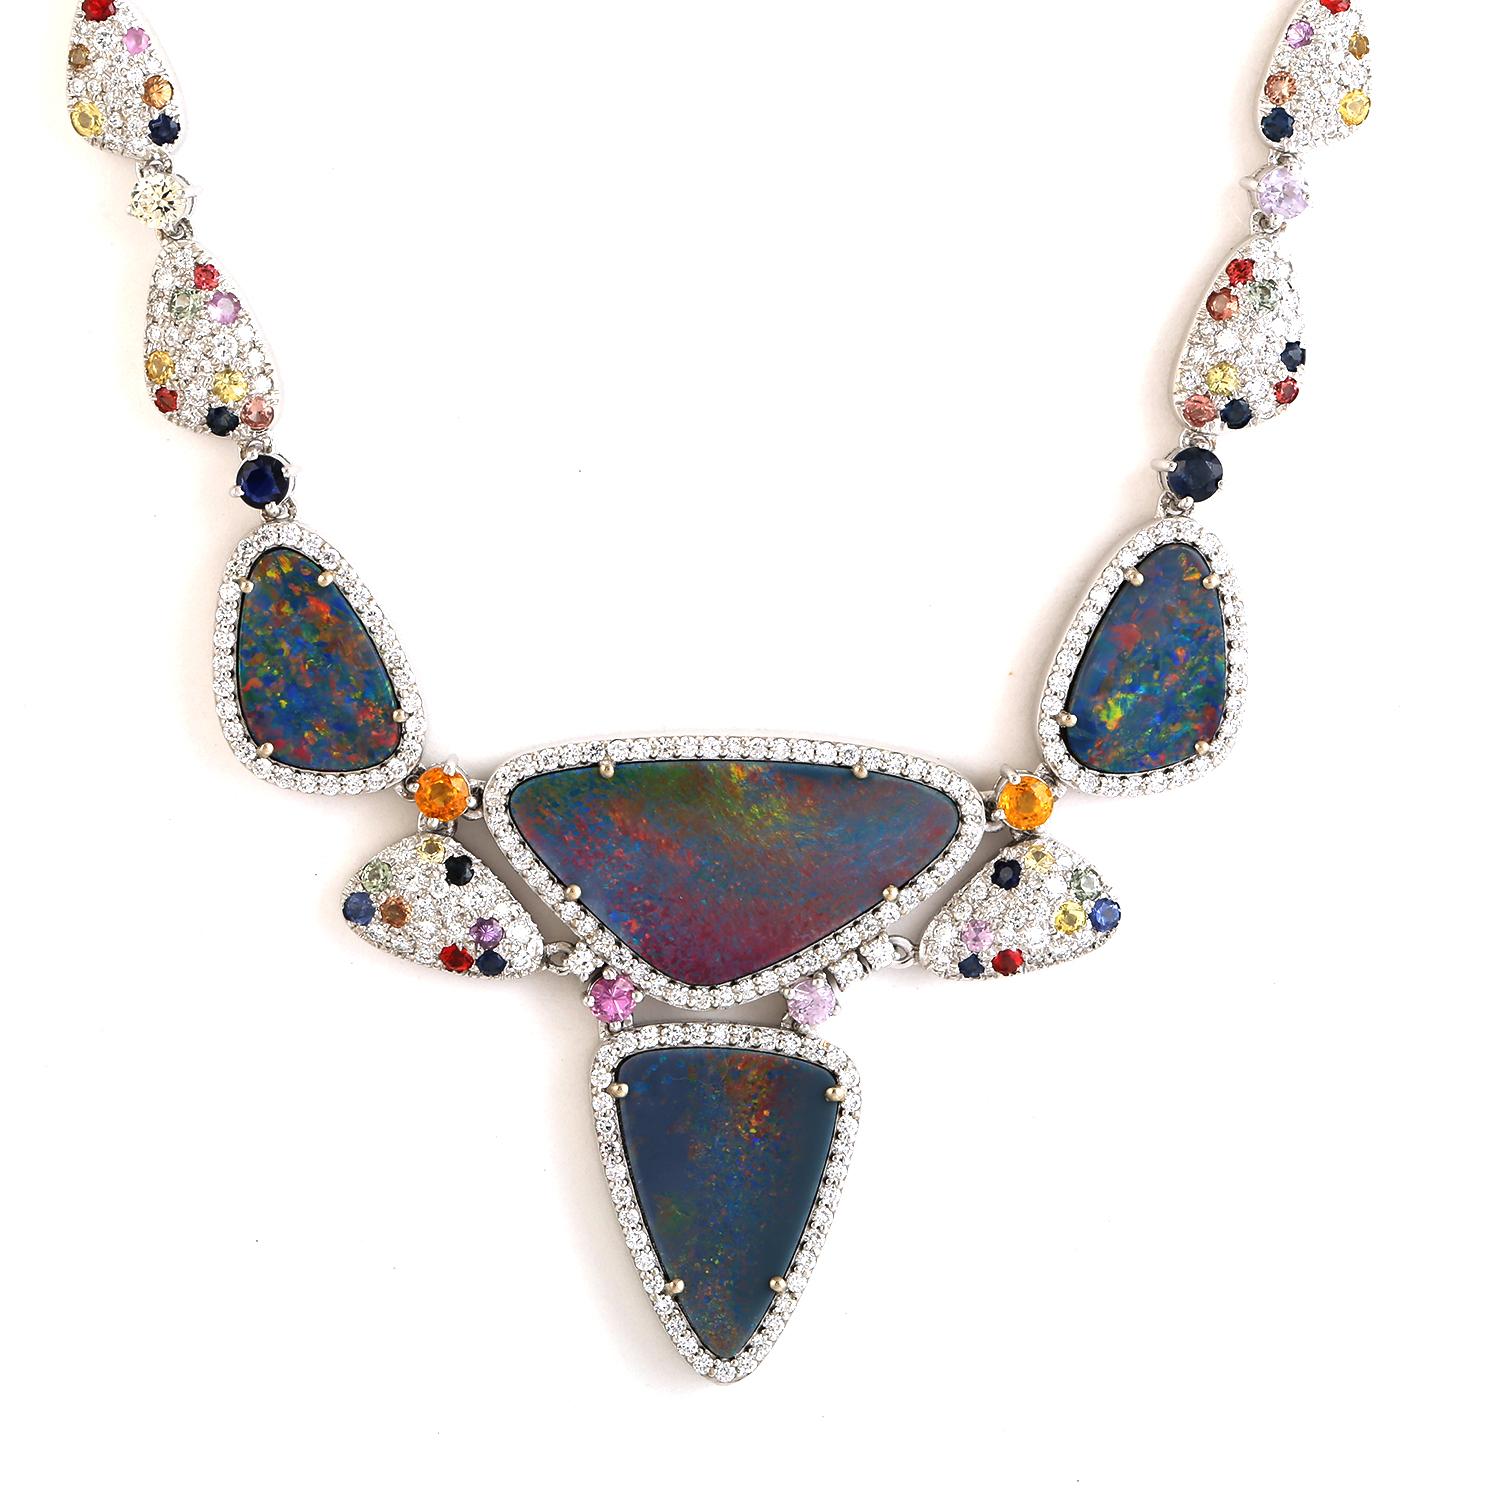 Contemporary 10.90 Ethiopian Opal Necklace With Multi Sapphire & Diamonds In 18k White Gold For Sale